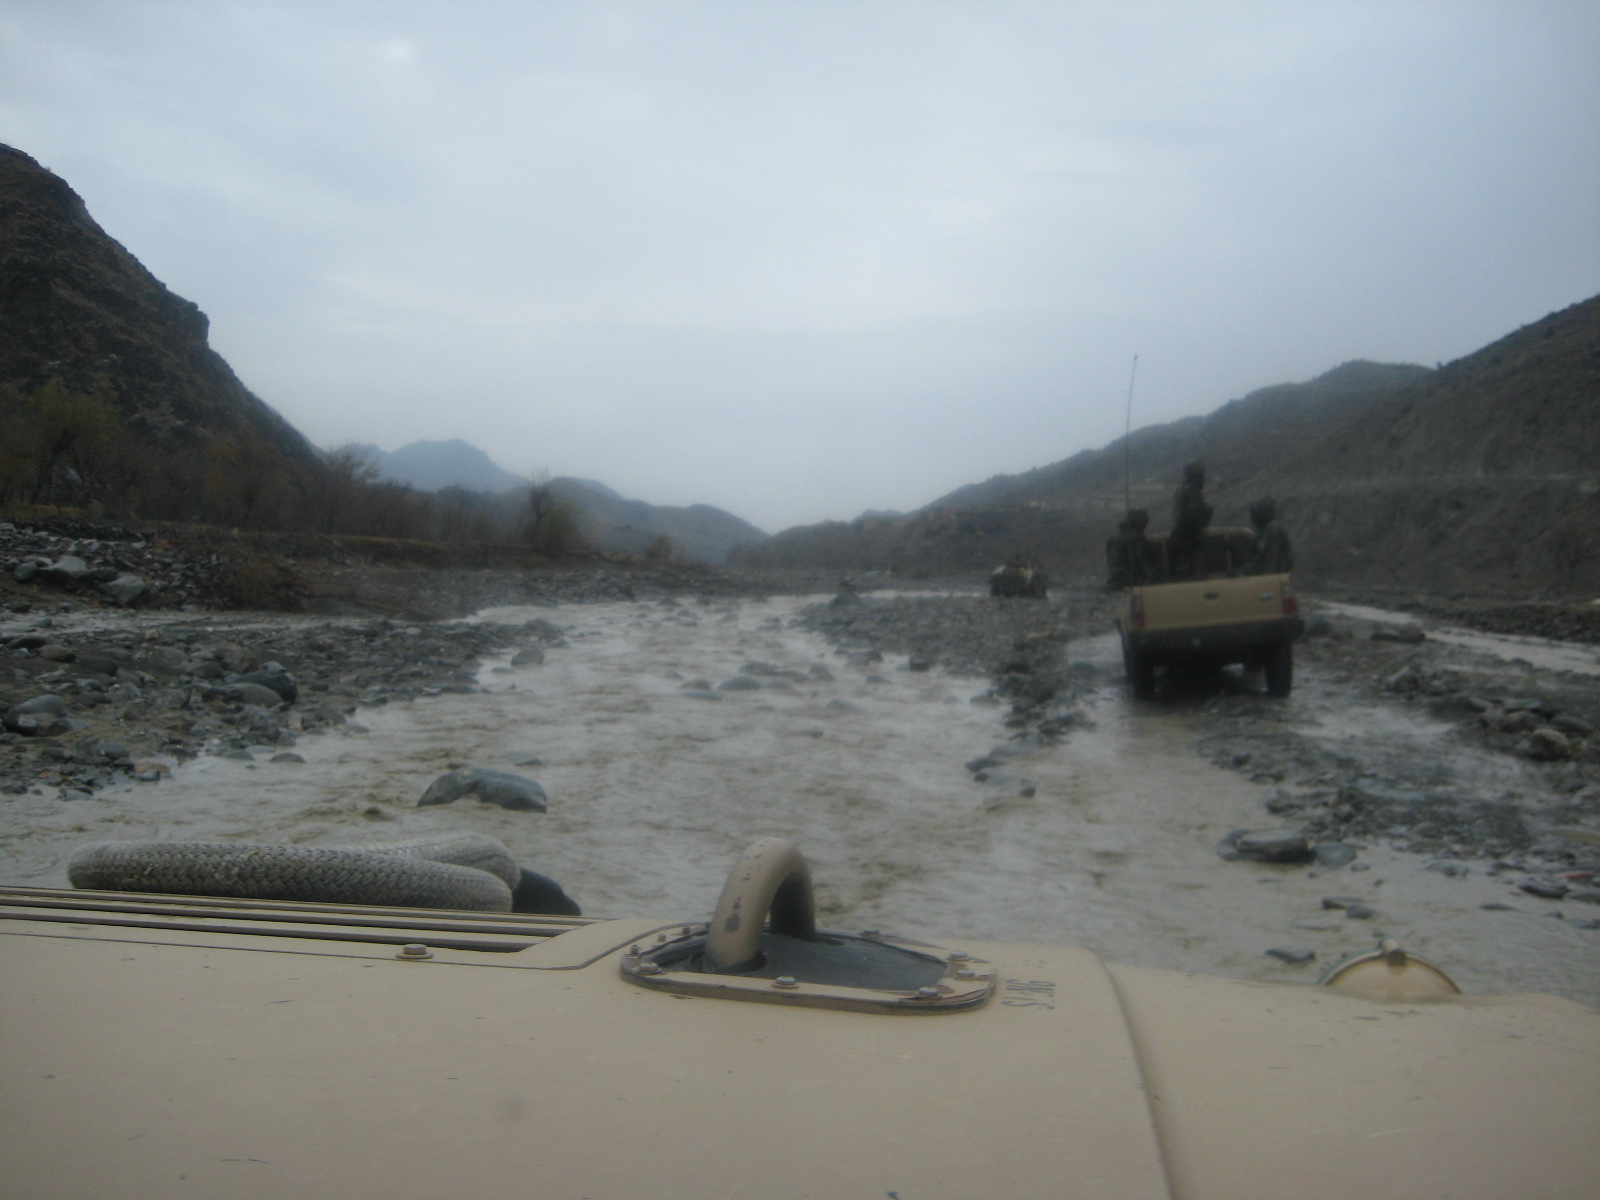 On the wadi road to Spera, Khost province, Afghanistan, January 2009.